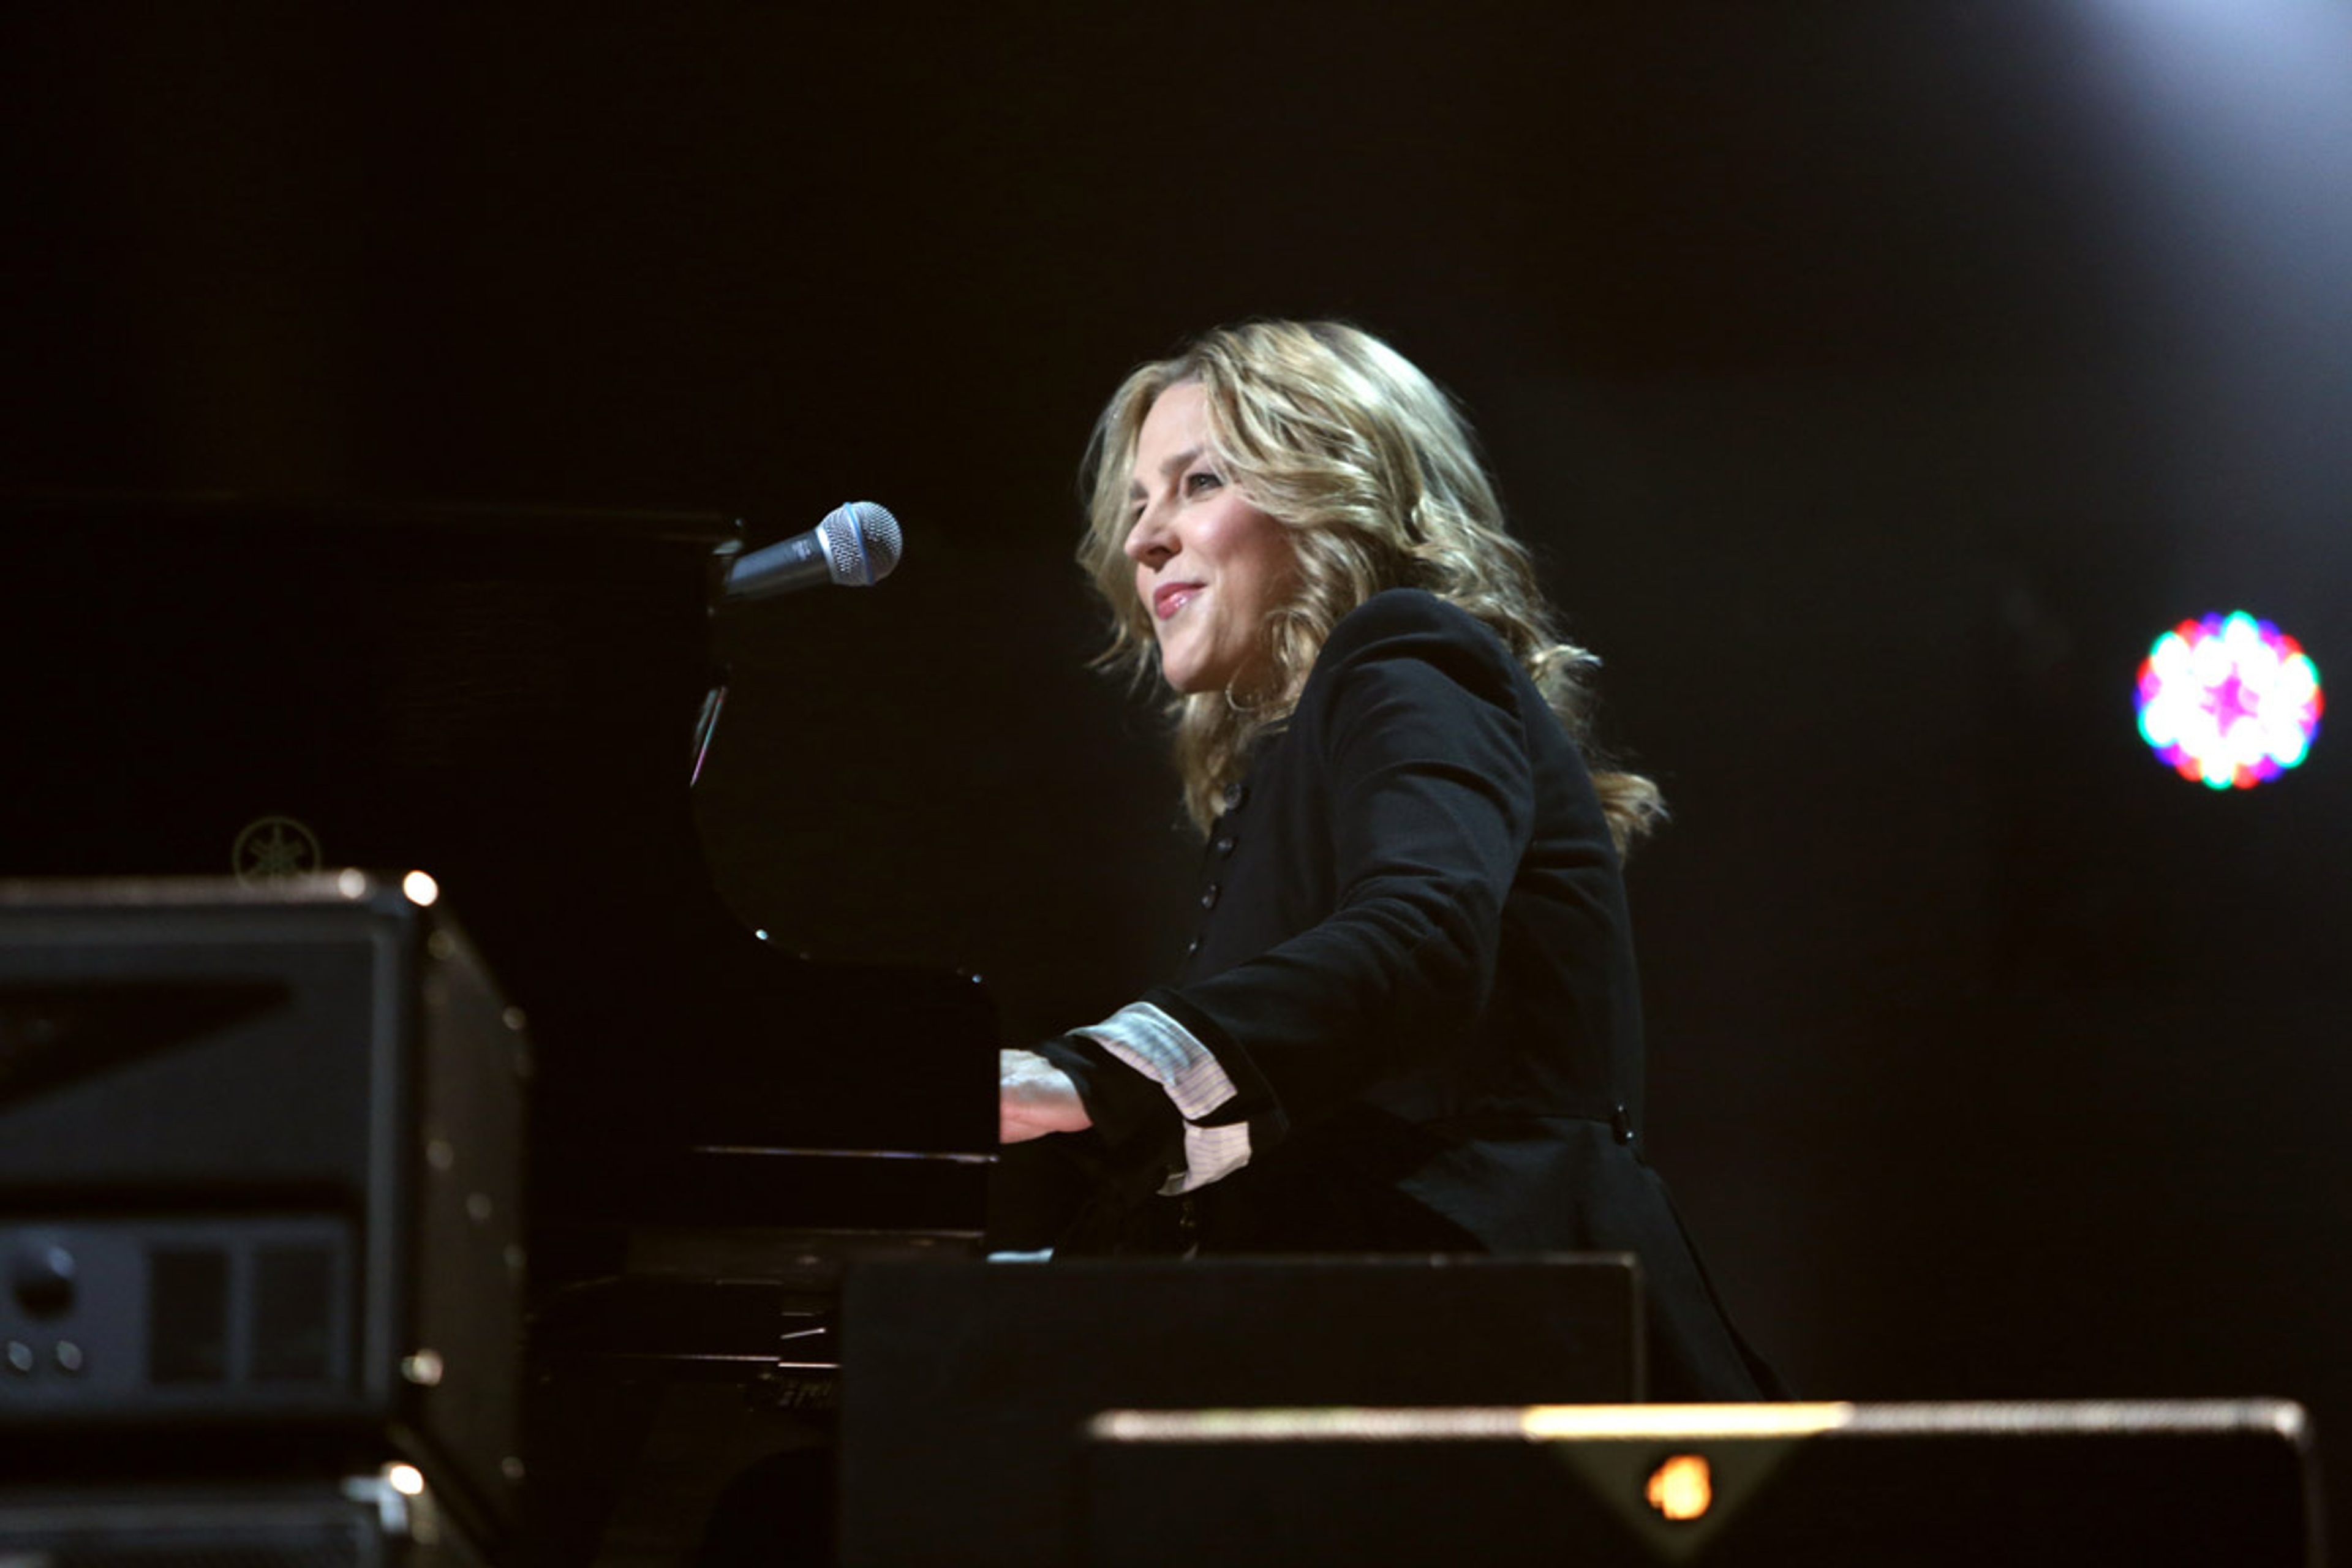 Diana Krall on piano during 'My Valentine', 12-12-12 Hurricane Sandy Benefit, Madison Square Garden, NYC, 12th December 2012